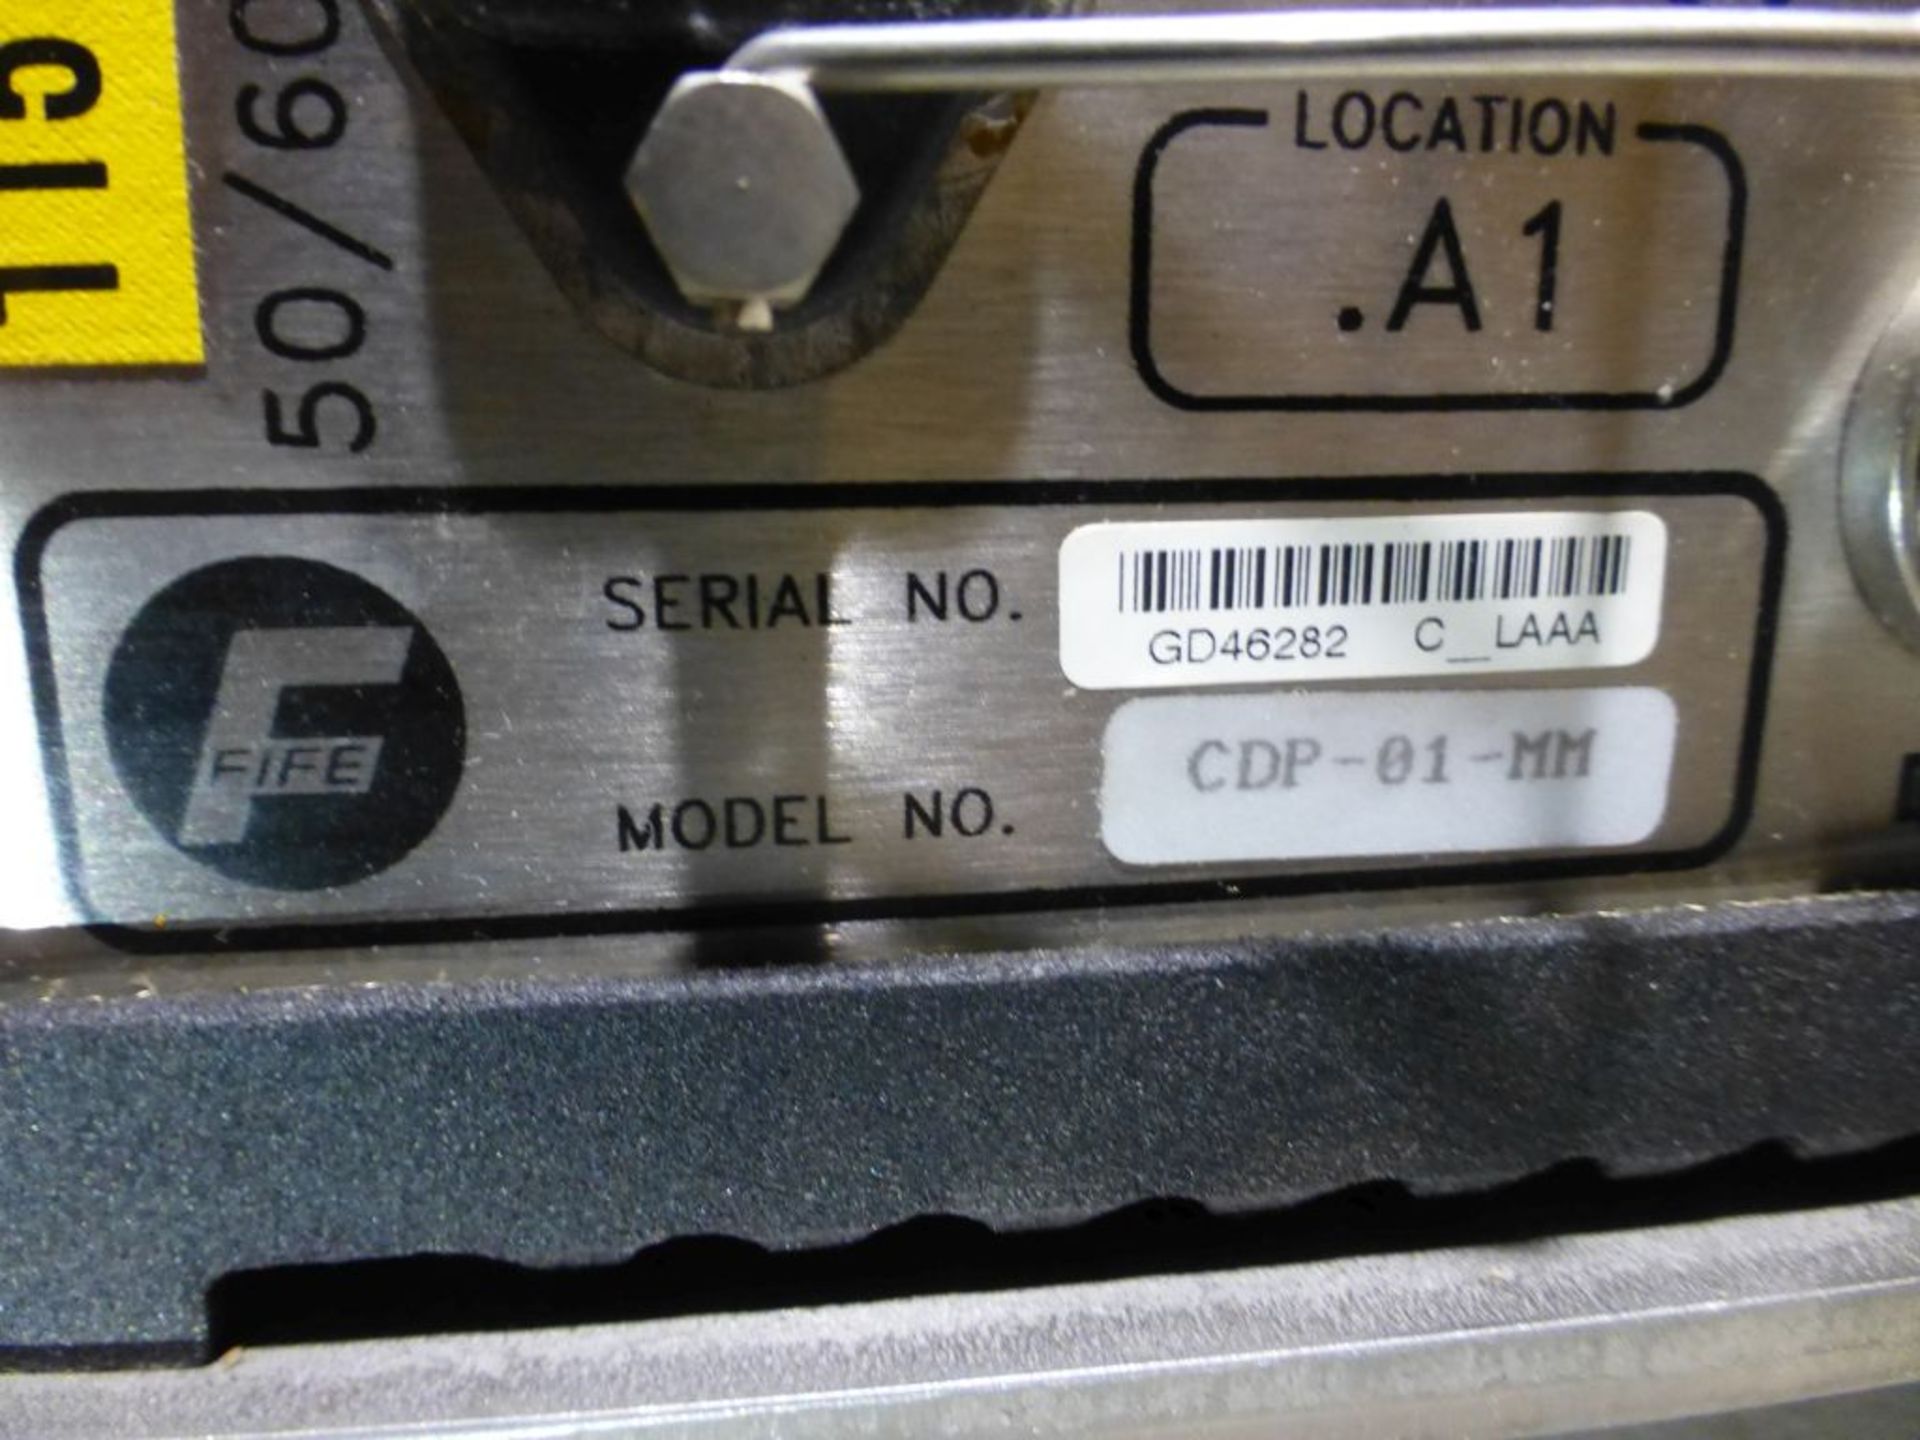 Fife Guide Controller | Model No. CDP-01-MM; 115V; Unused, Spare - Image 7 of 7